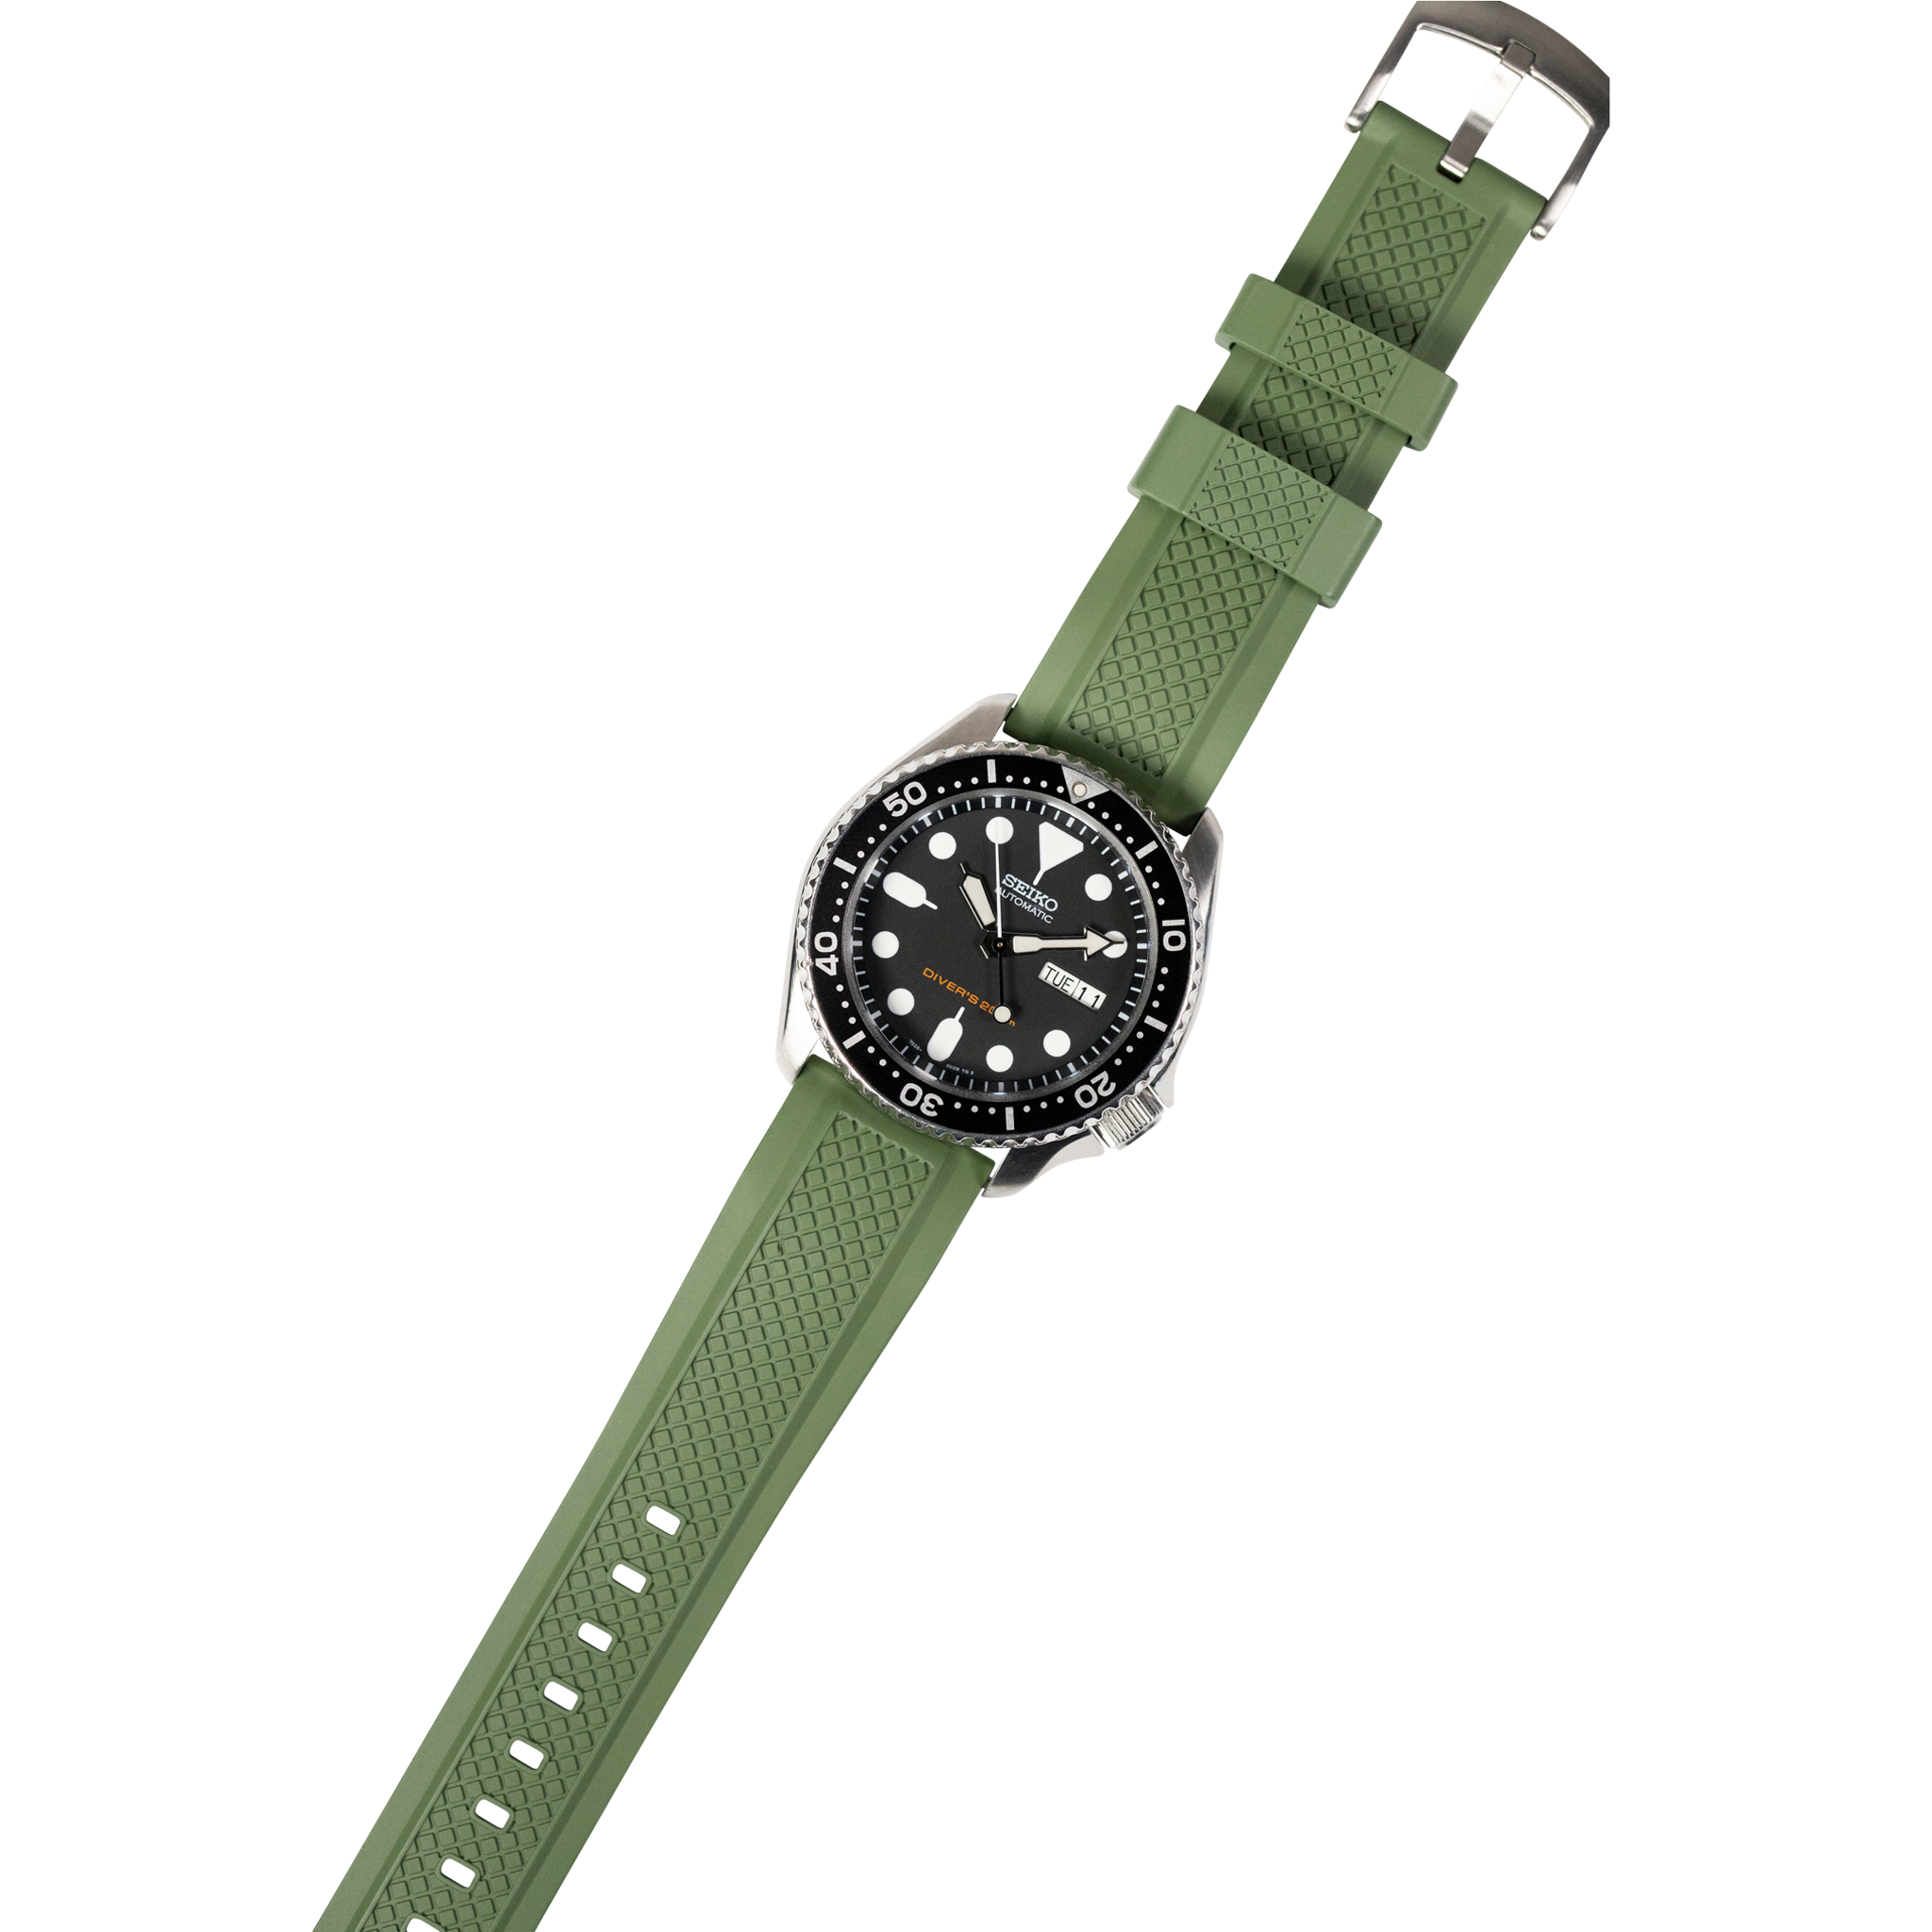 [Quick Release] GridLock FKM Rubber - Forest Green